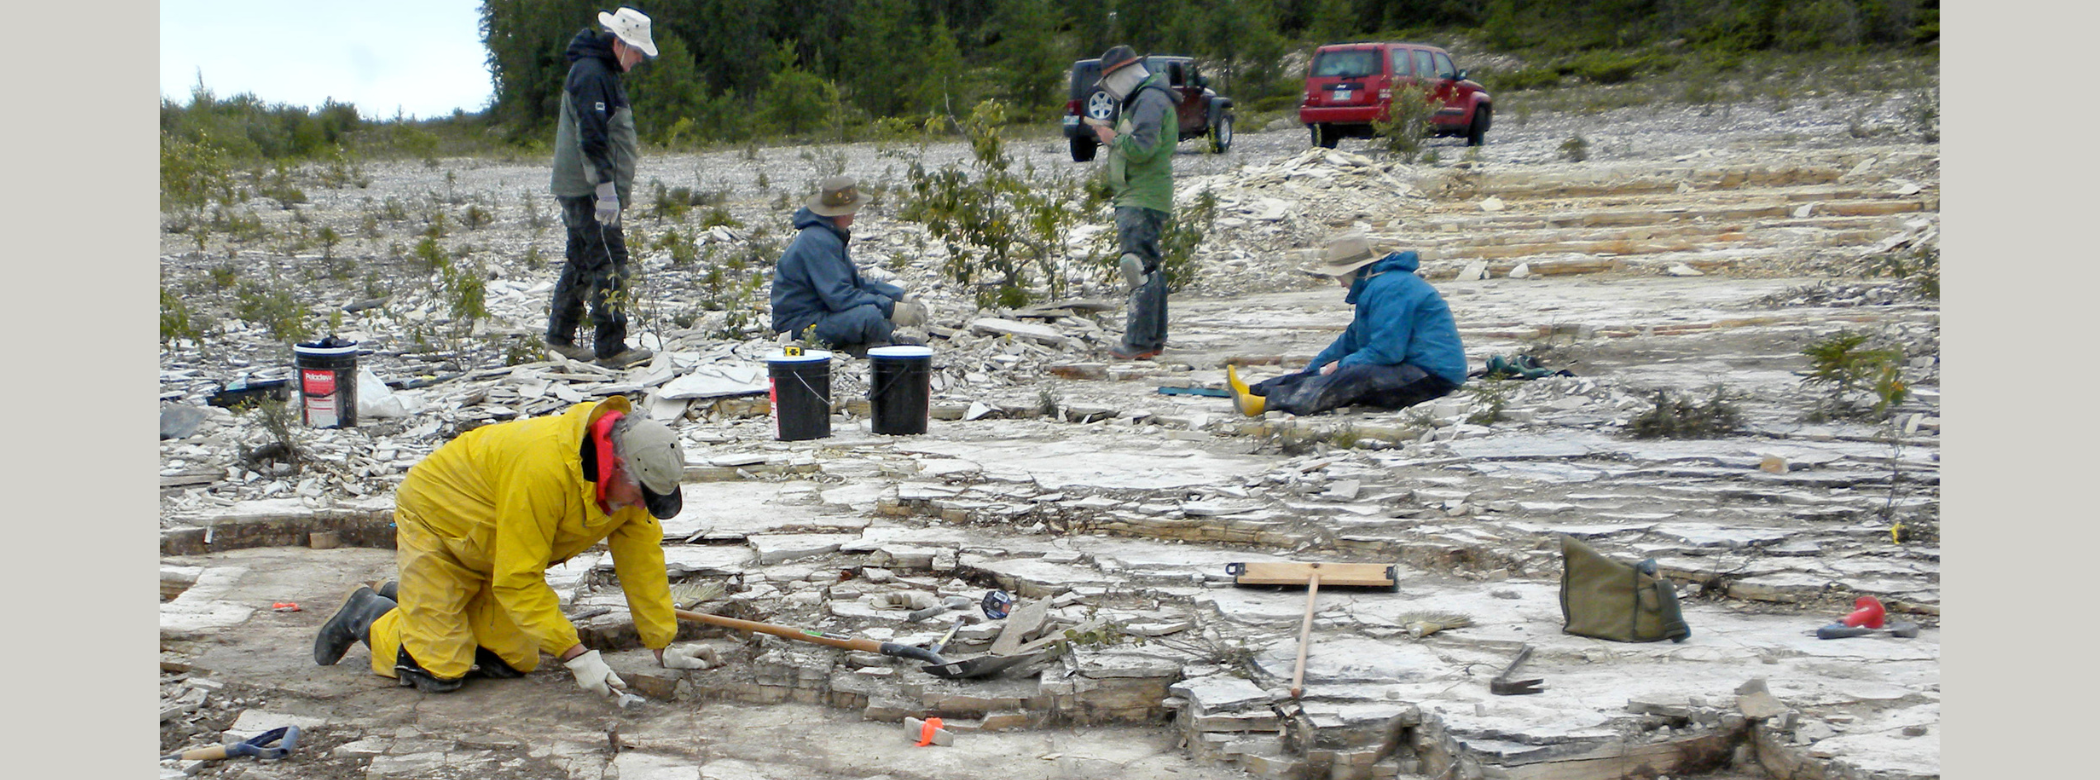 A group of five people dressed in rain gear, boots, and hats crawl on a limestone bedrock surface, hammering and levering fossils from the surface.